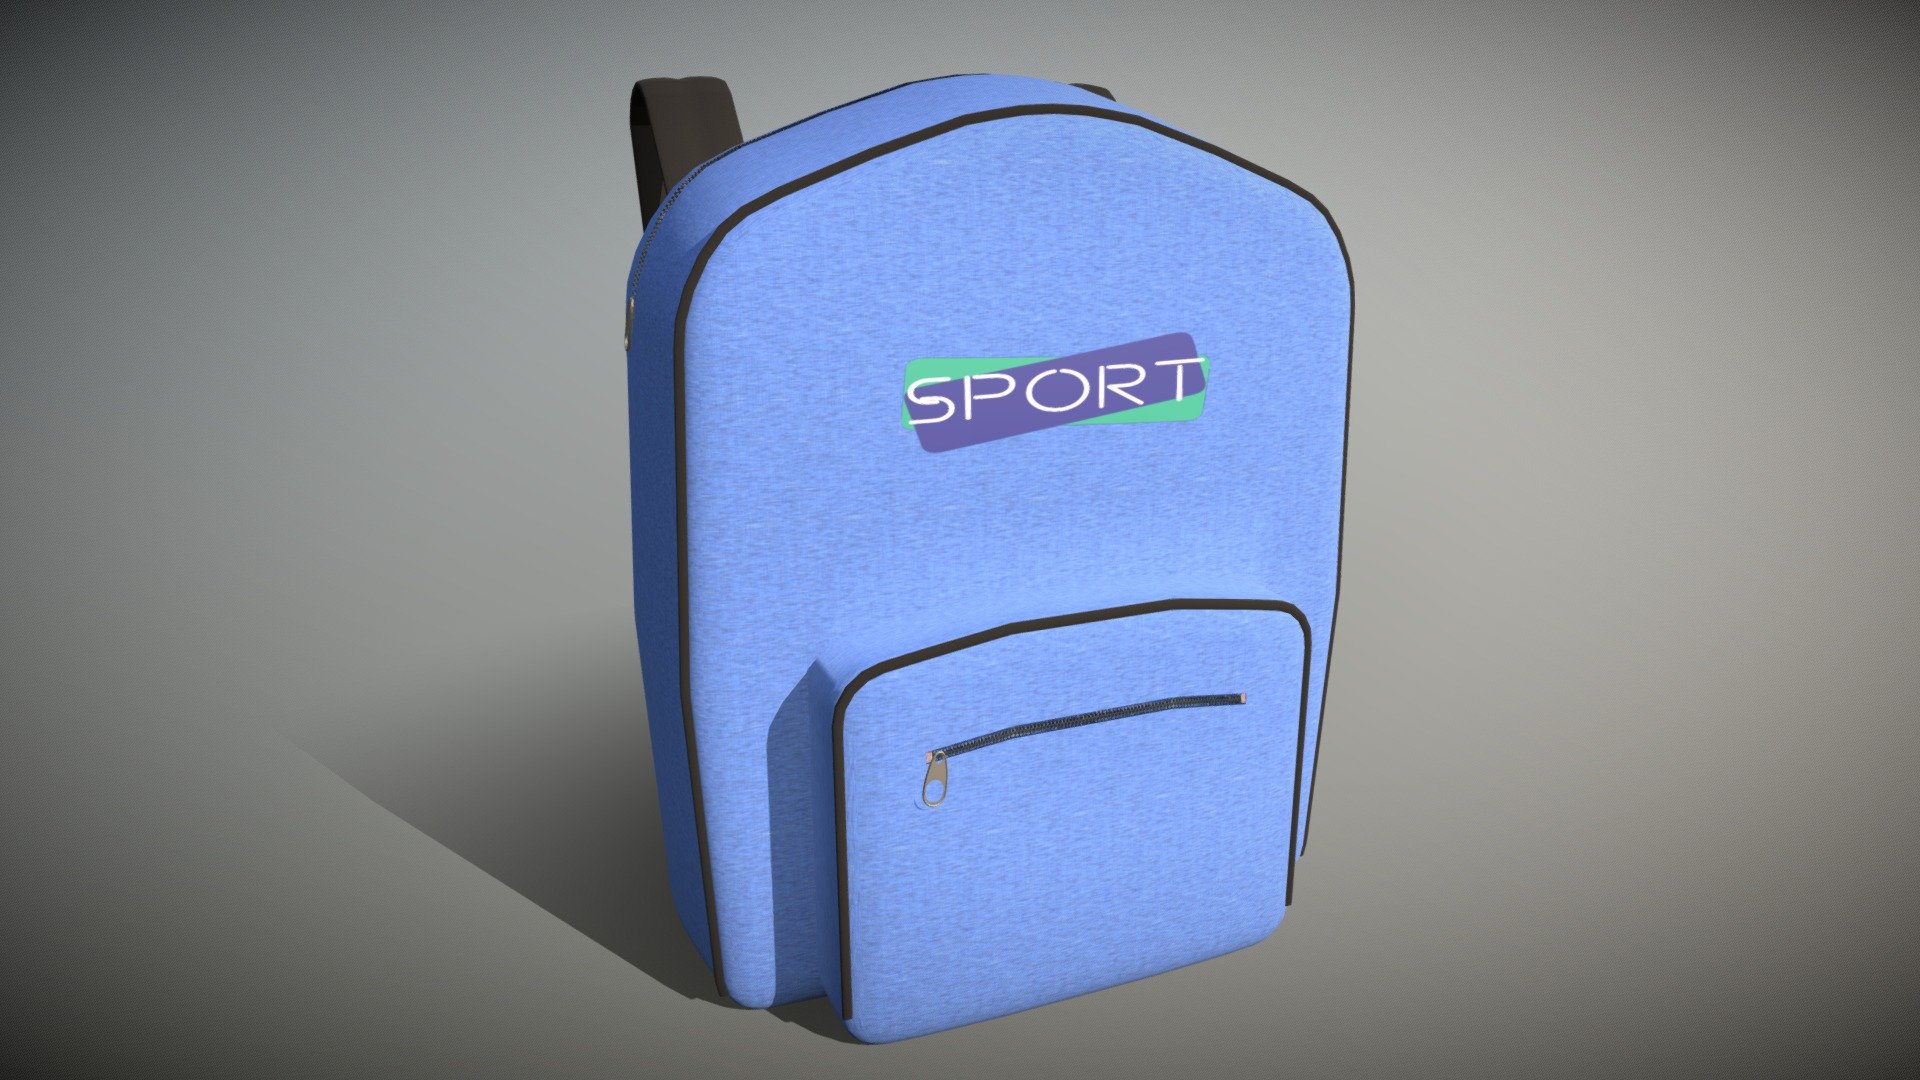 I created this backpack for use in animation and games. The custom generic branding was made in photoshop to avoid any potential copyright issues. The backpack is textured and mapped using HD photorealistic textures. I made it as low poly as possible while preserving realism to not use up any of your resources 3d model